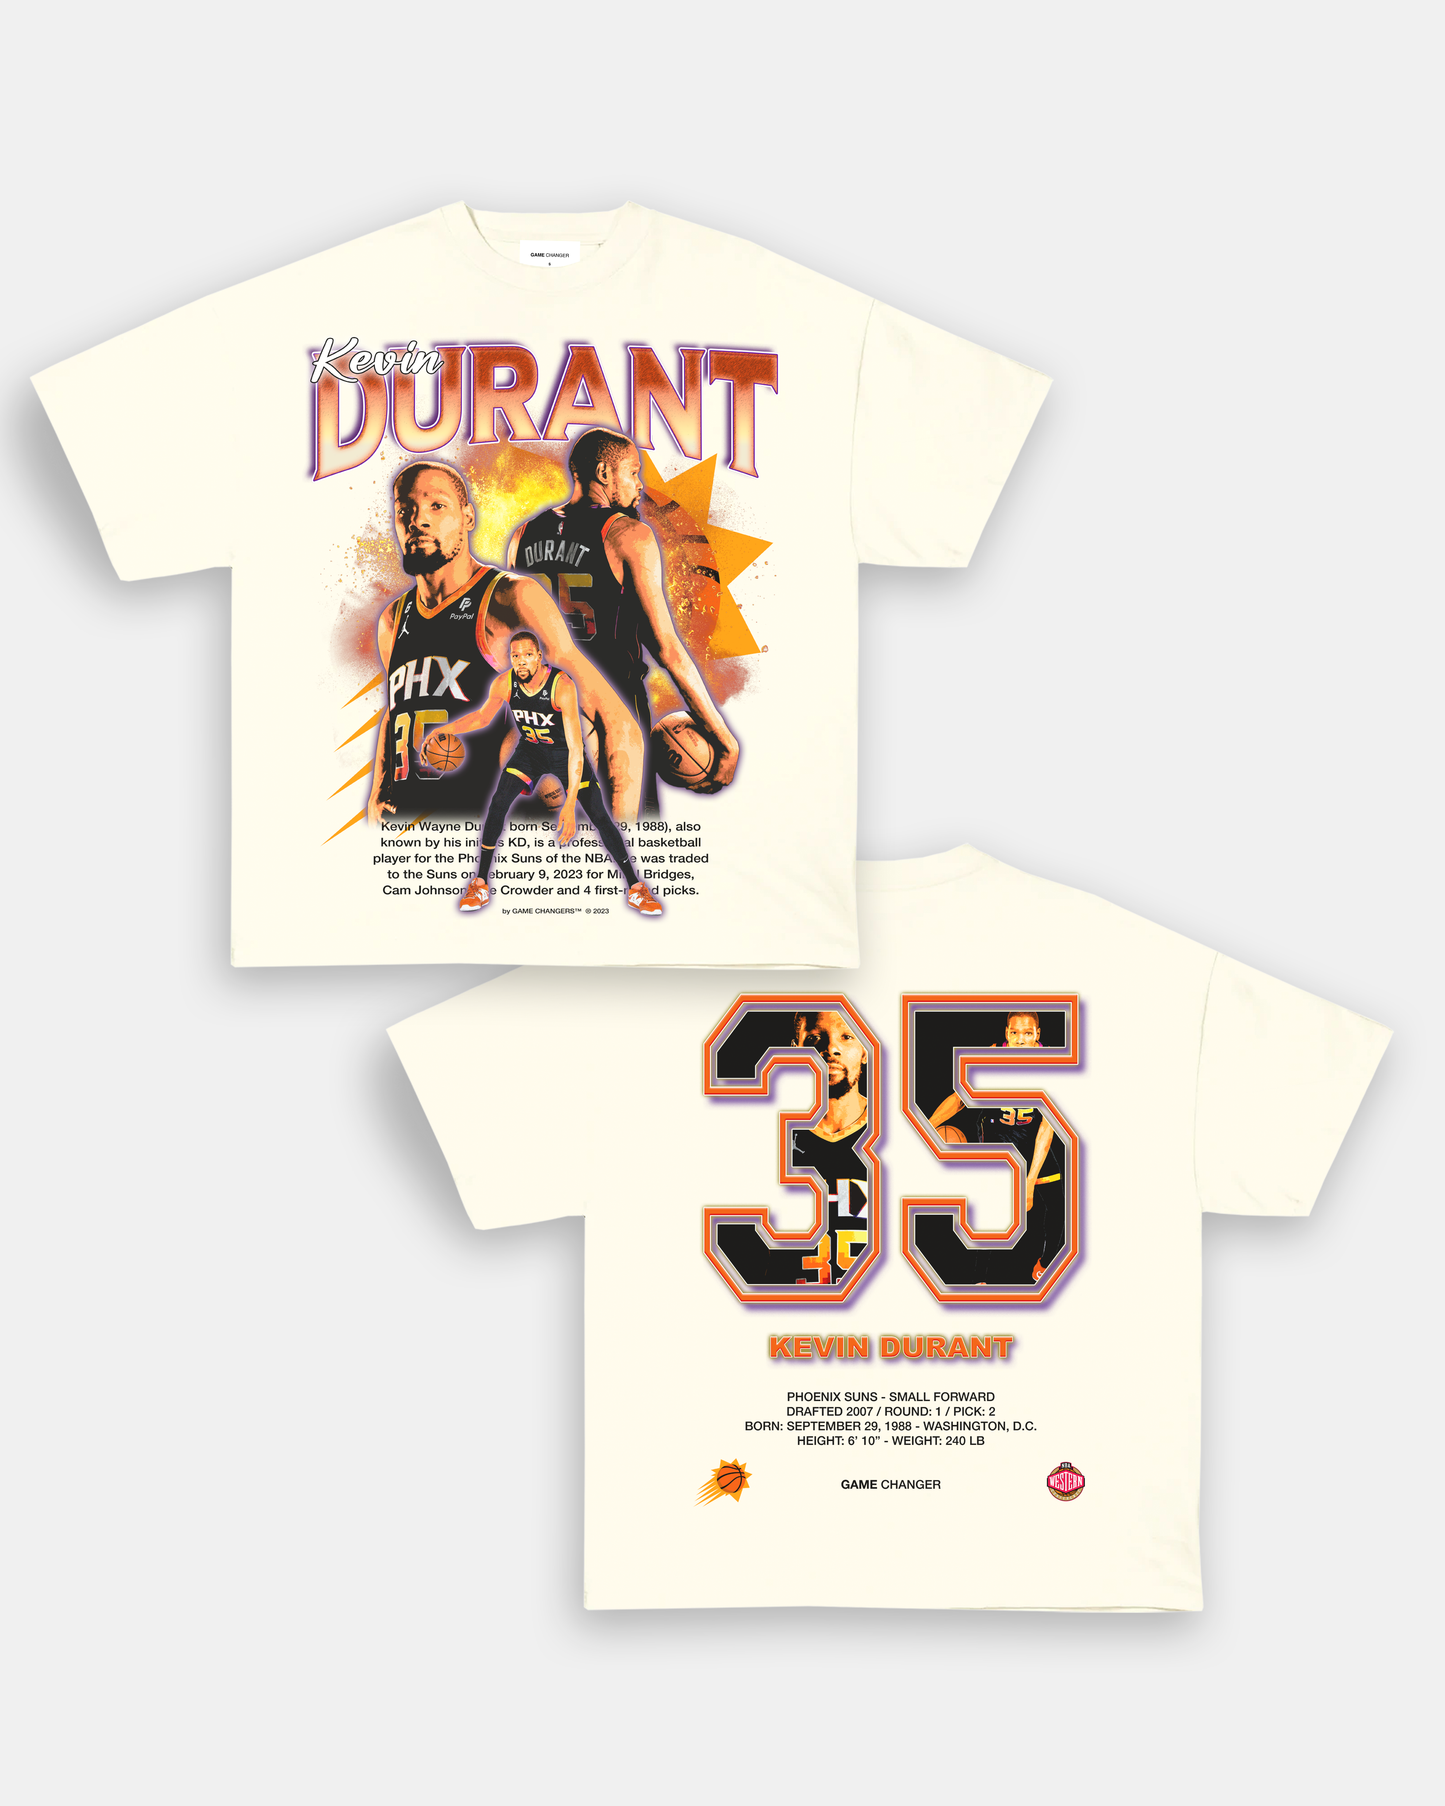 PHX KEVIN DURANT TEE - [DS]